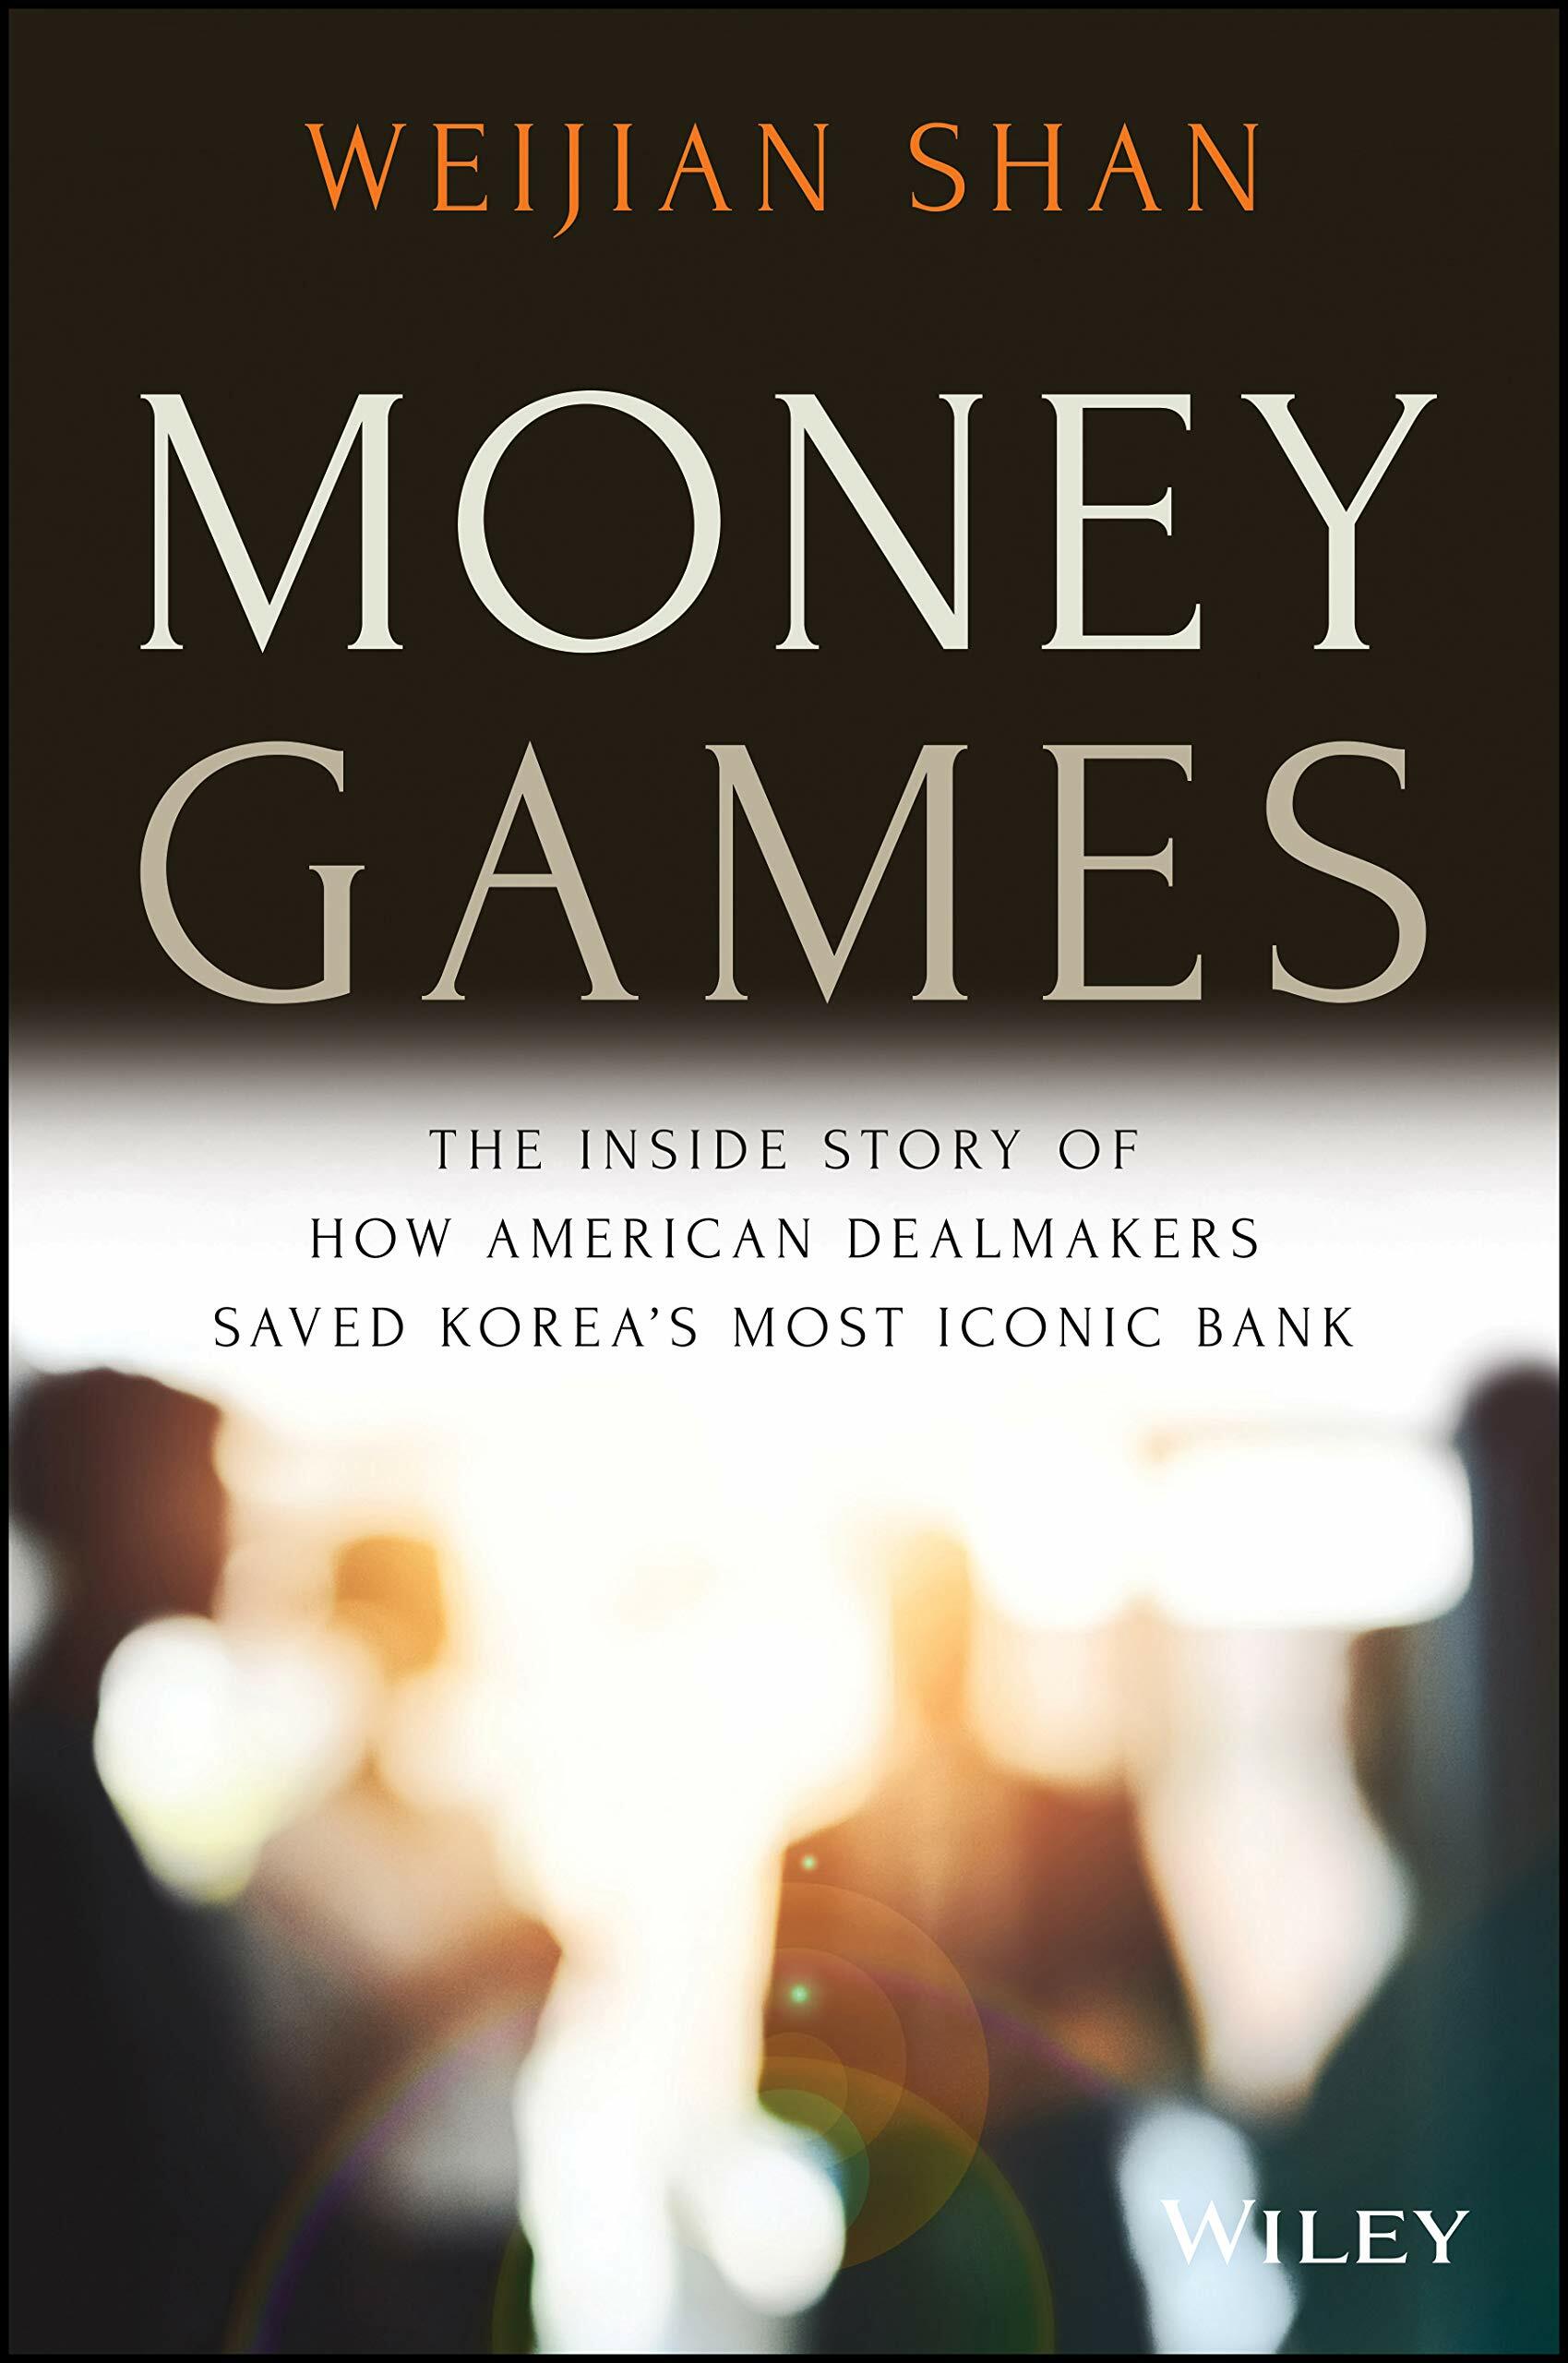 Money Games: The Inside Story of How American Dealmakers Saved Koreas Most Iconic Bank (Hardcover)